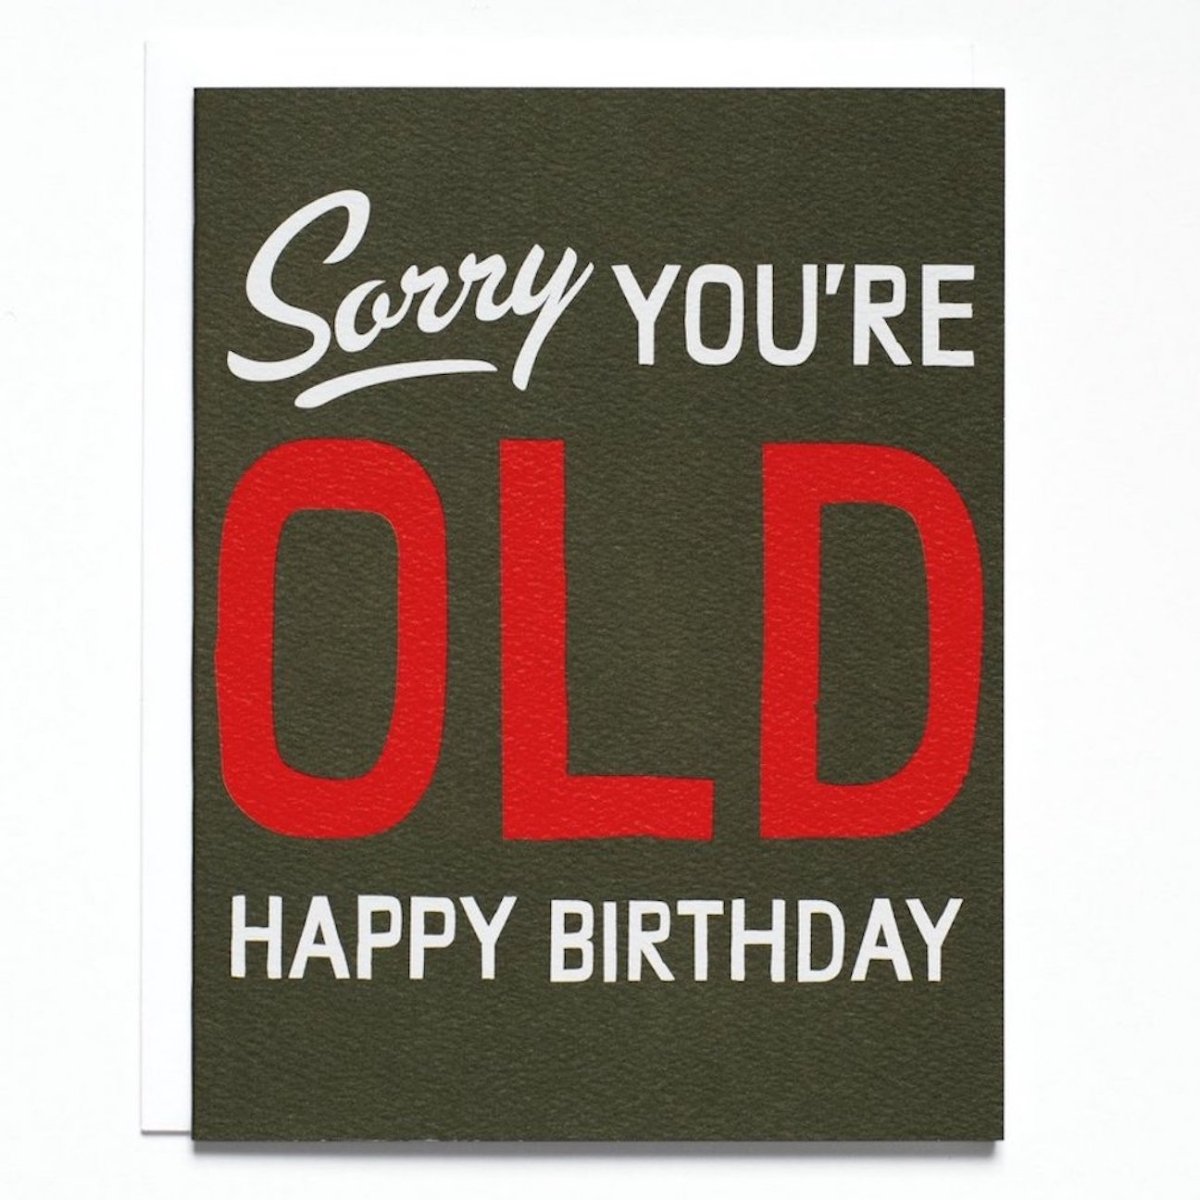 Black card with large text in white and red that reads: "SORRY YOU'RE OLD HAPPY BIRTHDAY." Made with recycled paper by Banquet Atelier in Vancouver, British Columbia, Canada.